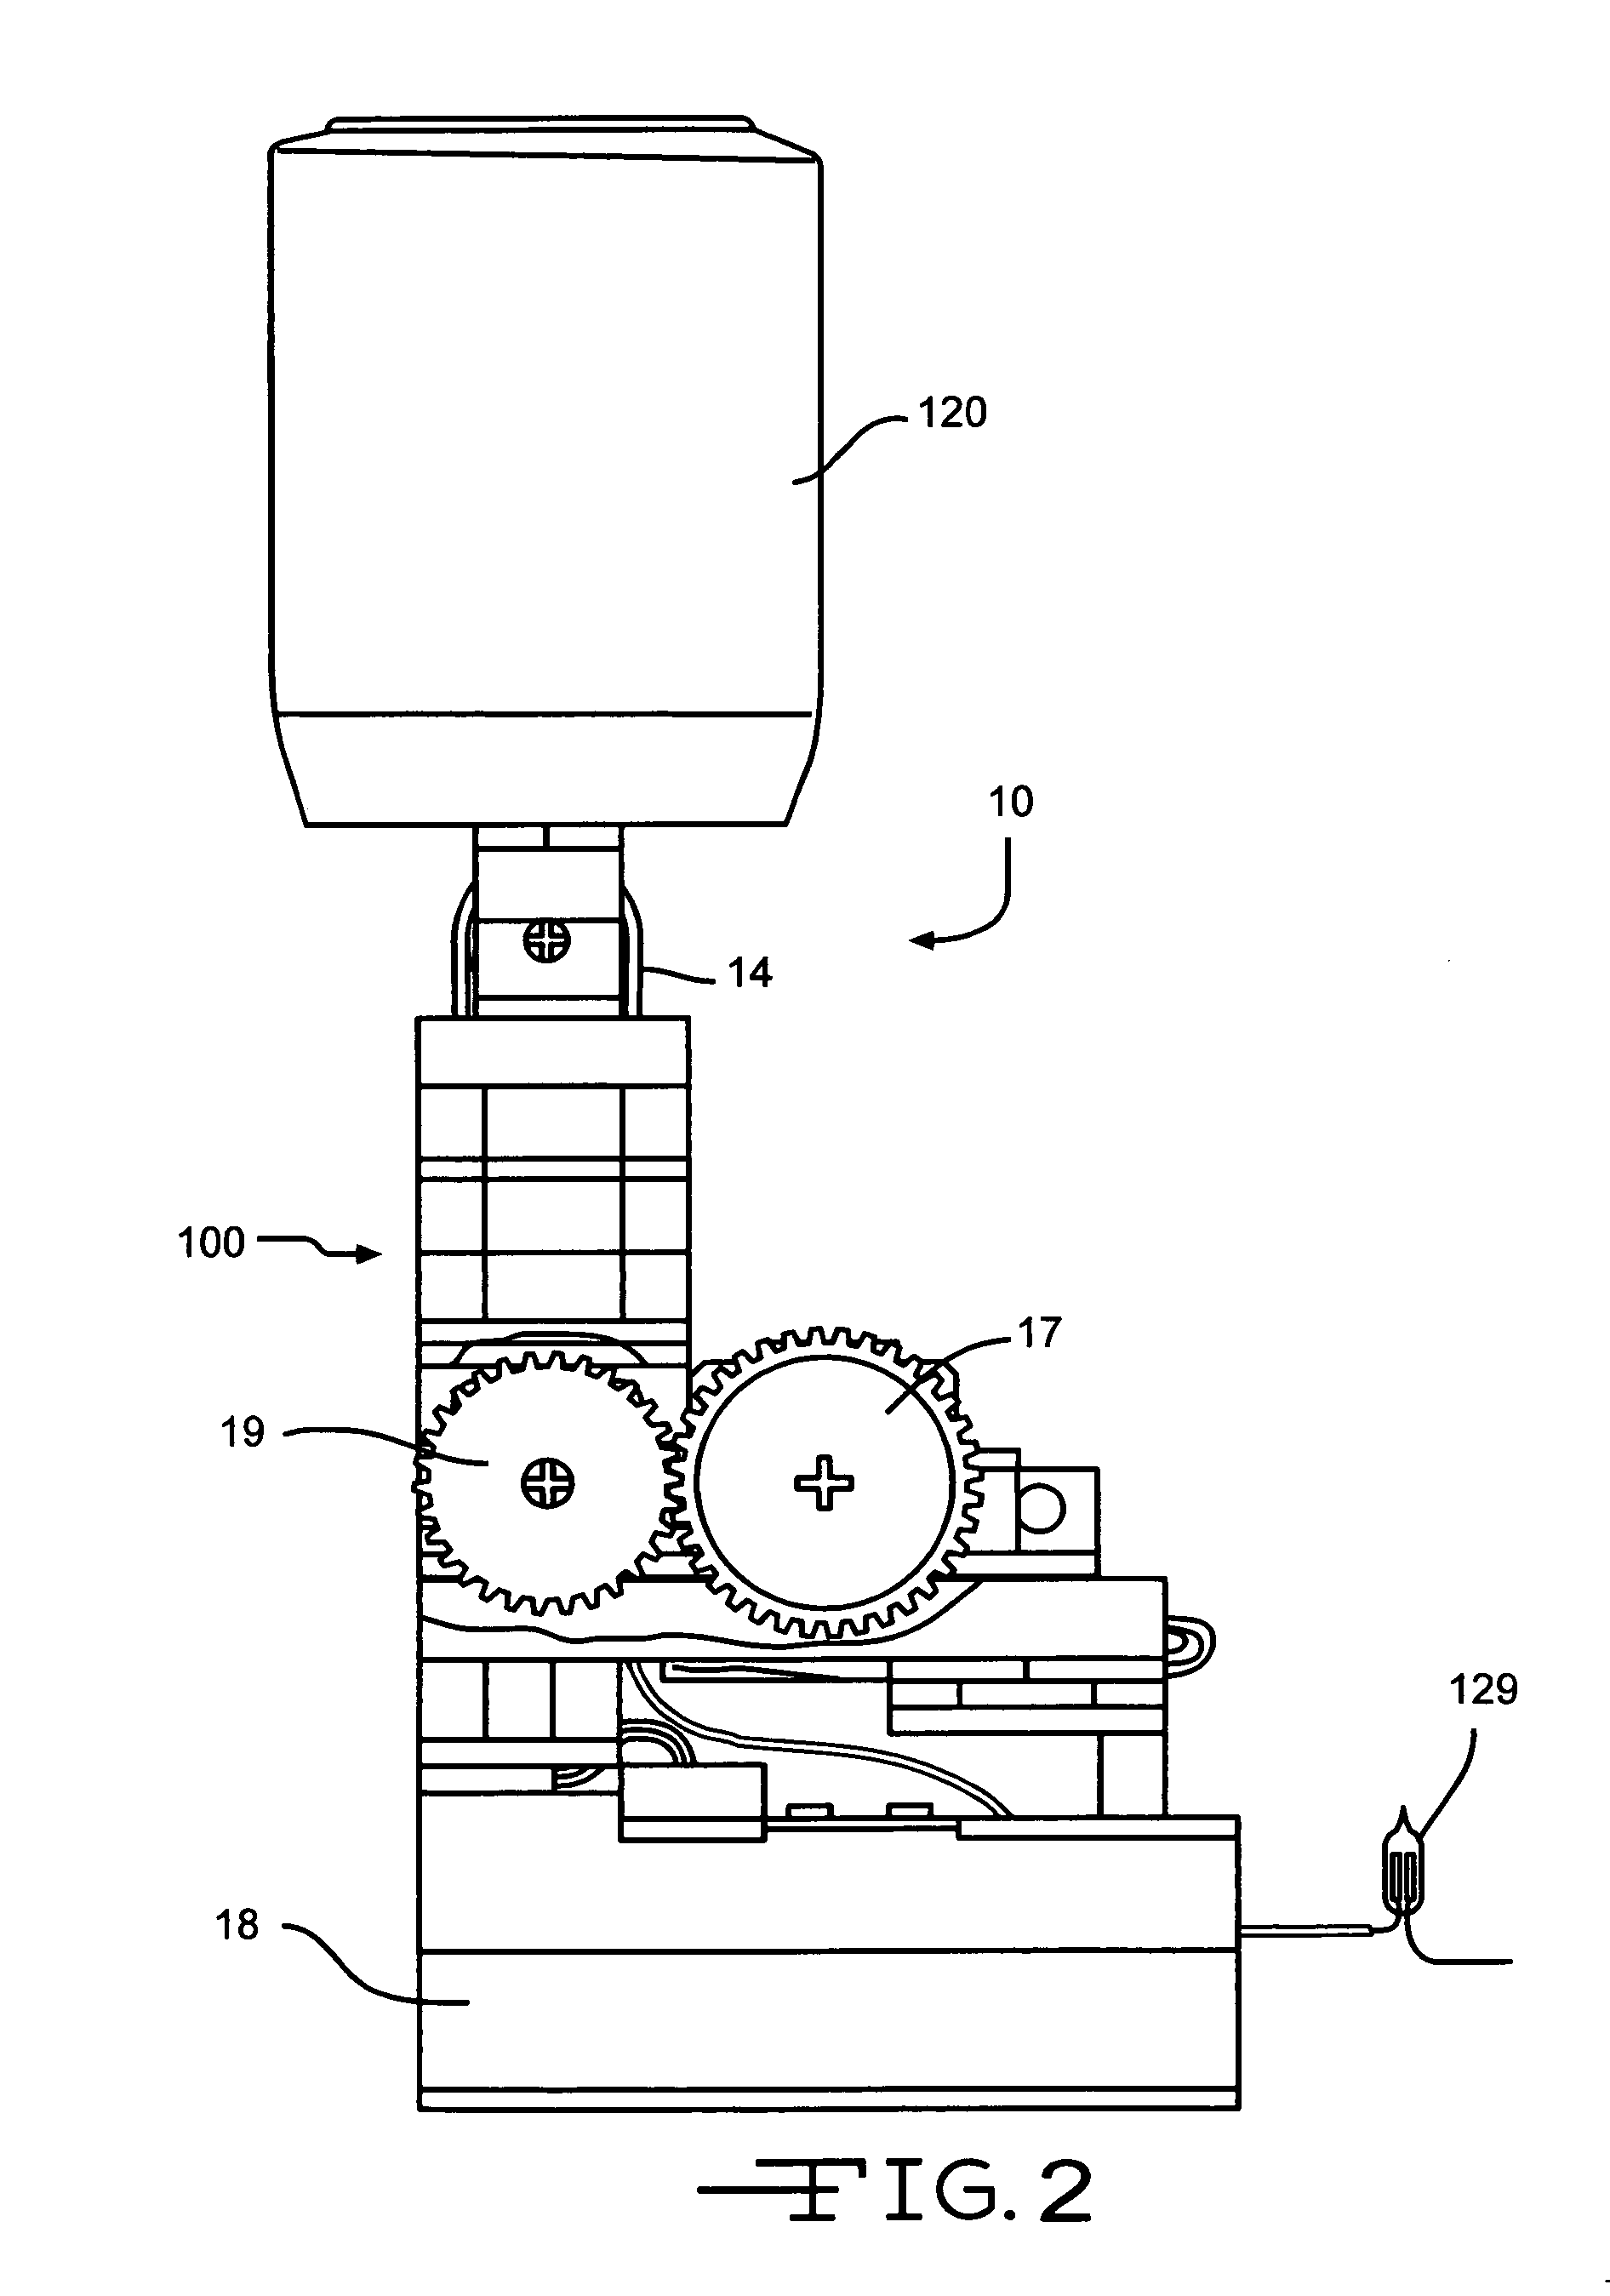 Electrostatic charge generating assembly